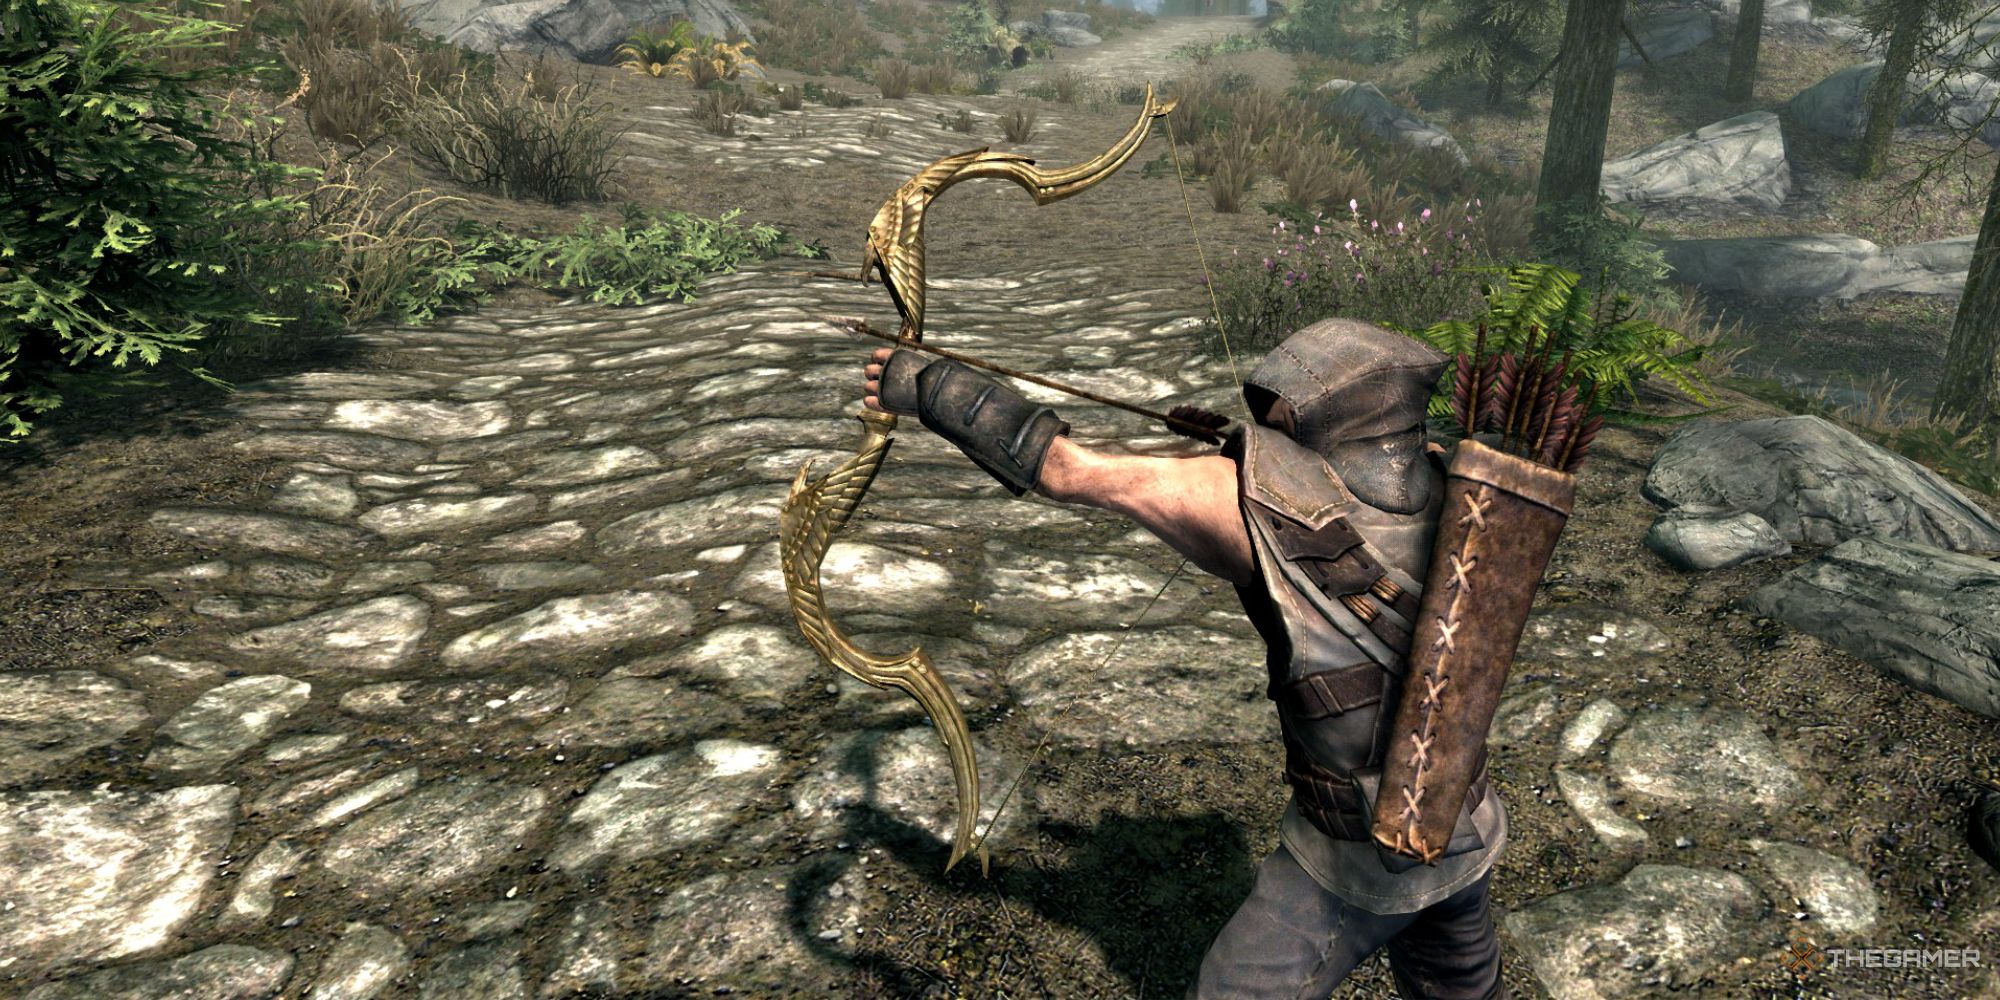 The Player Holding an Elven Bow in Skyrim